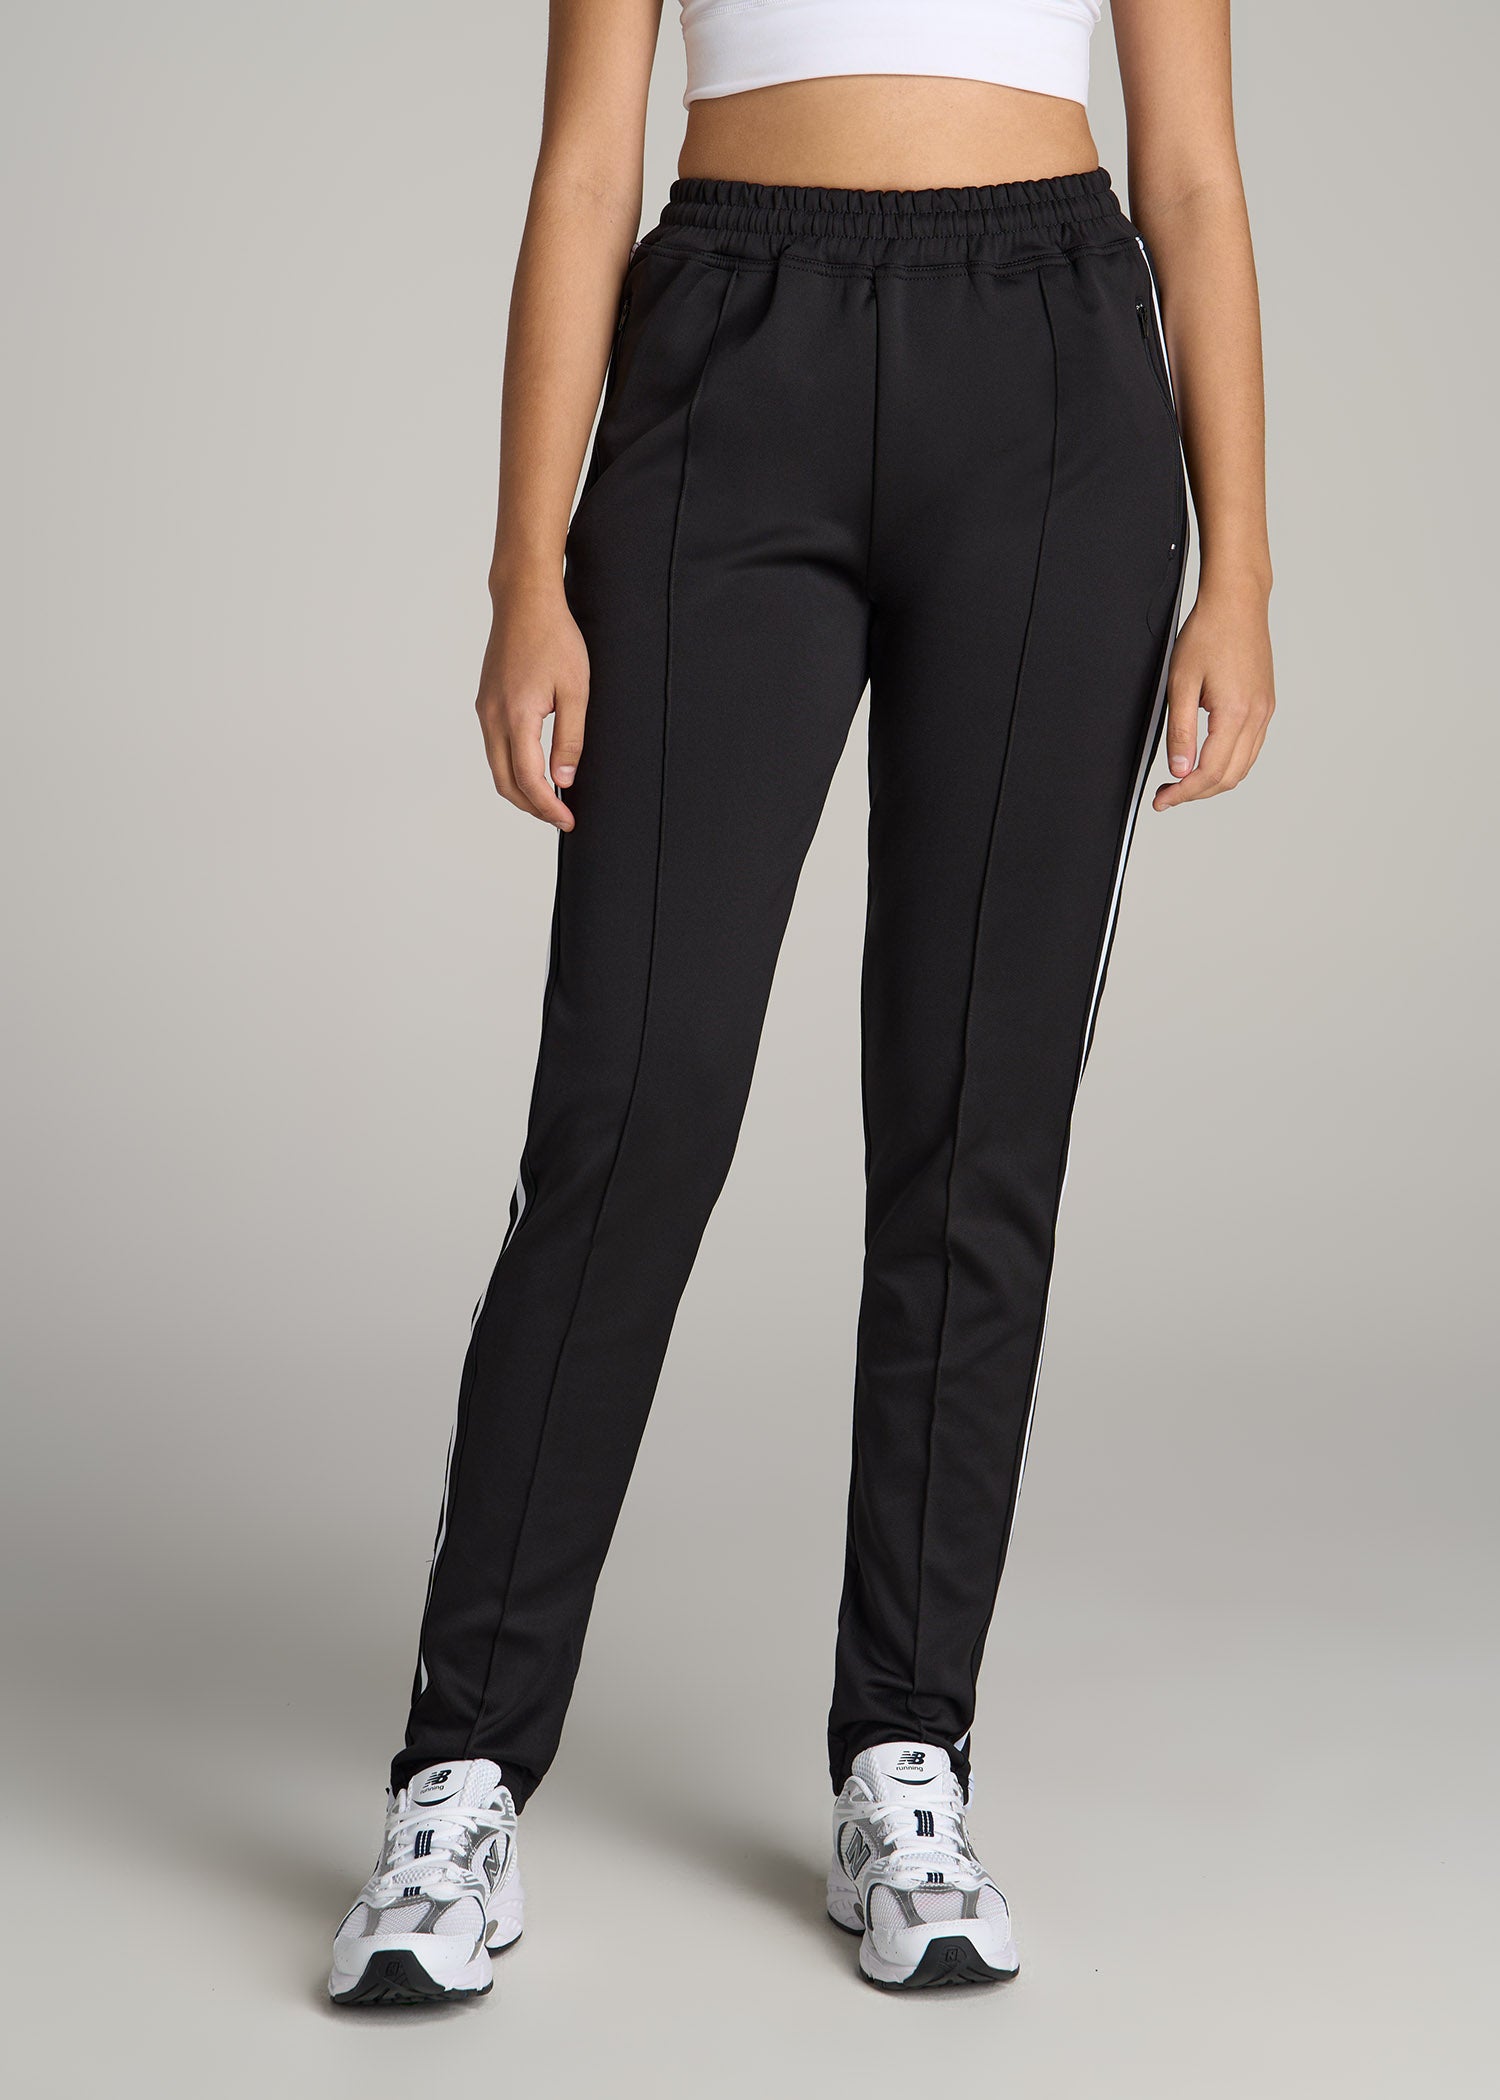 Workout Clothes for Tall Women - Women's Sweatpants Tall Sizes – American  Tall